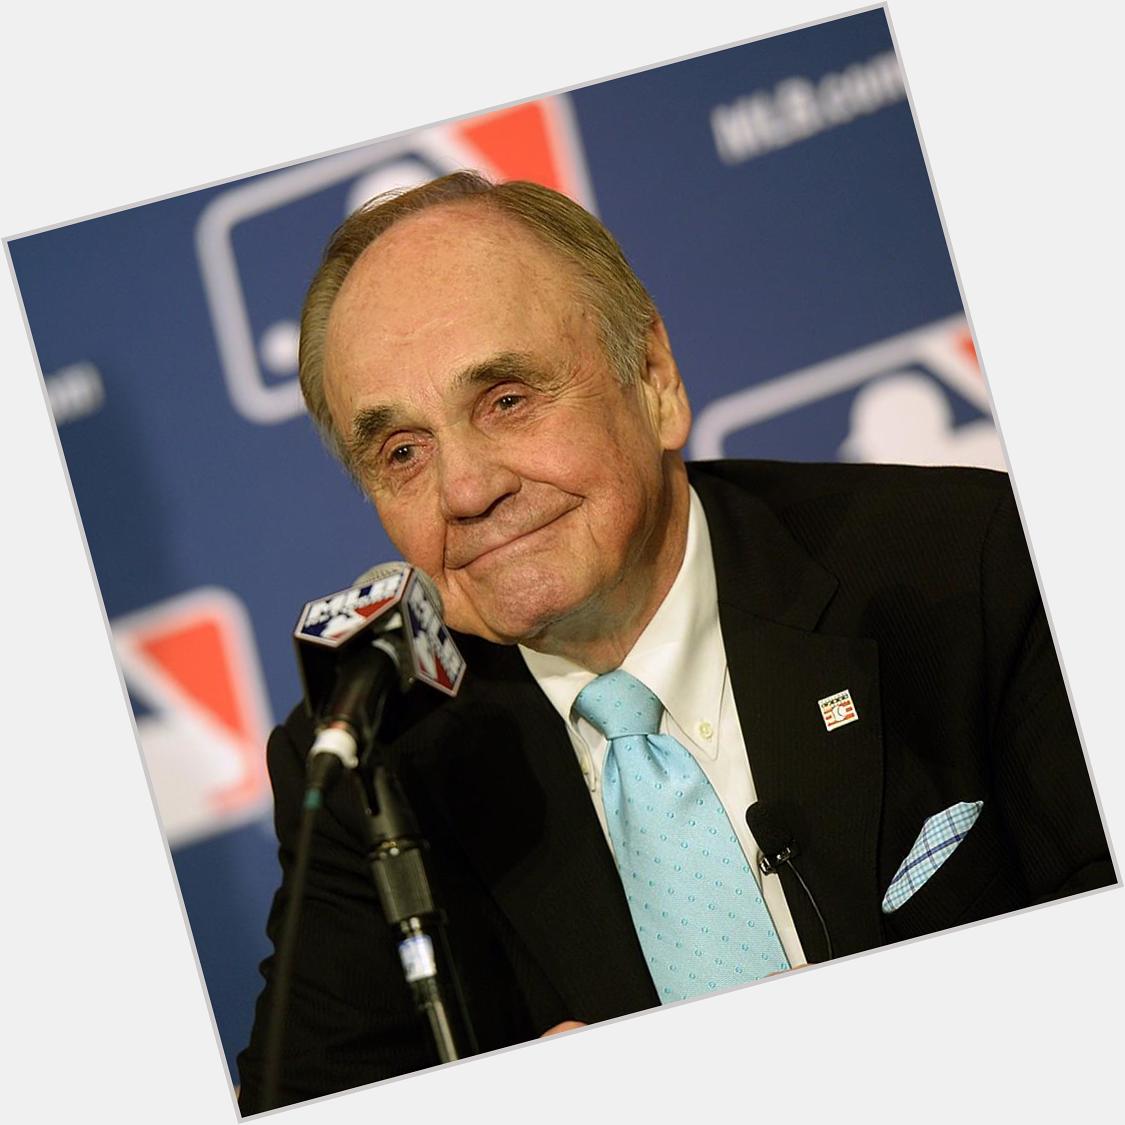   Wishing a very happy 80th birthday to broadcaster, Dick Enberg! 